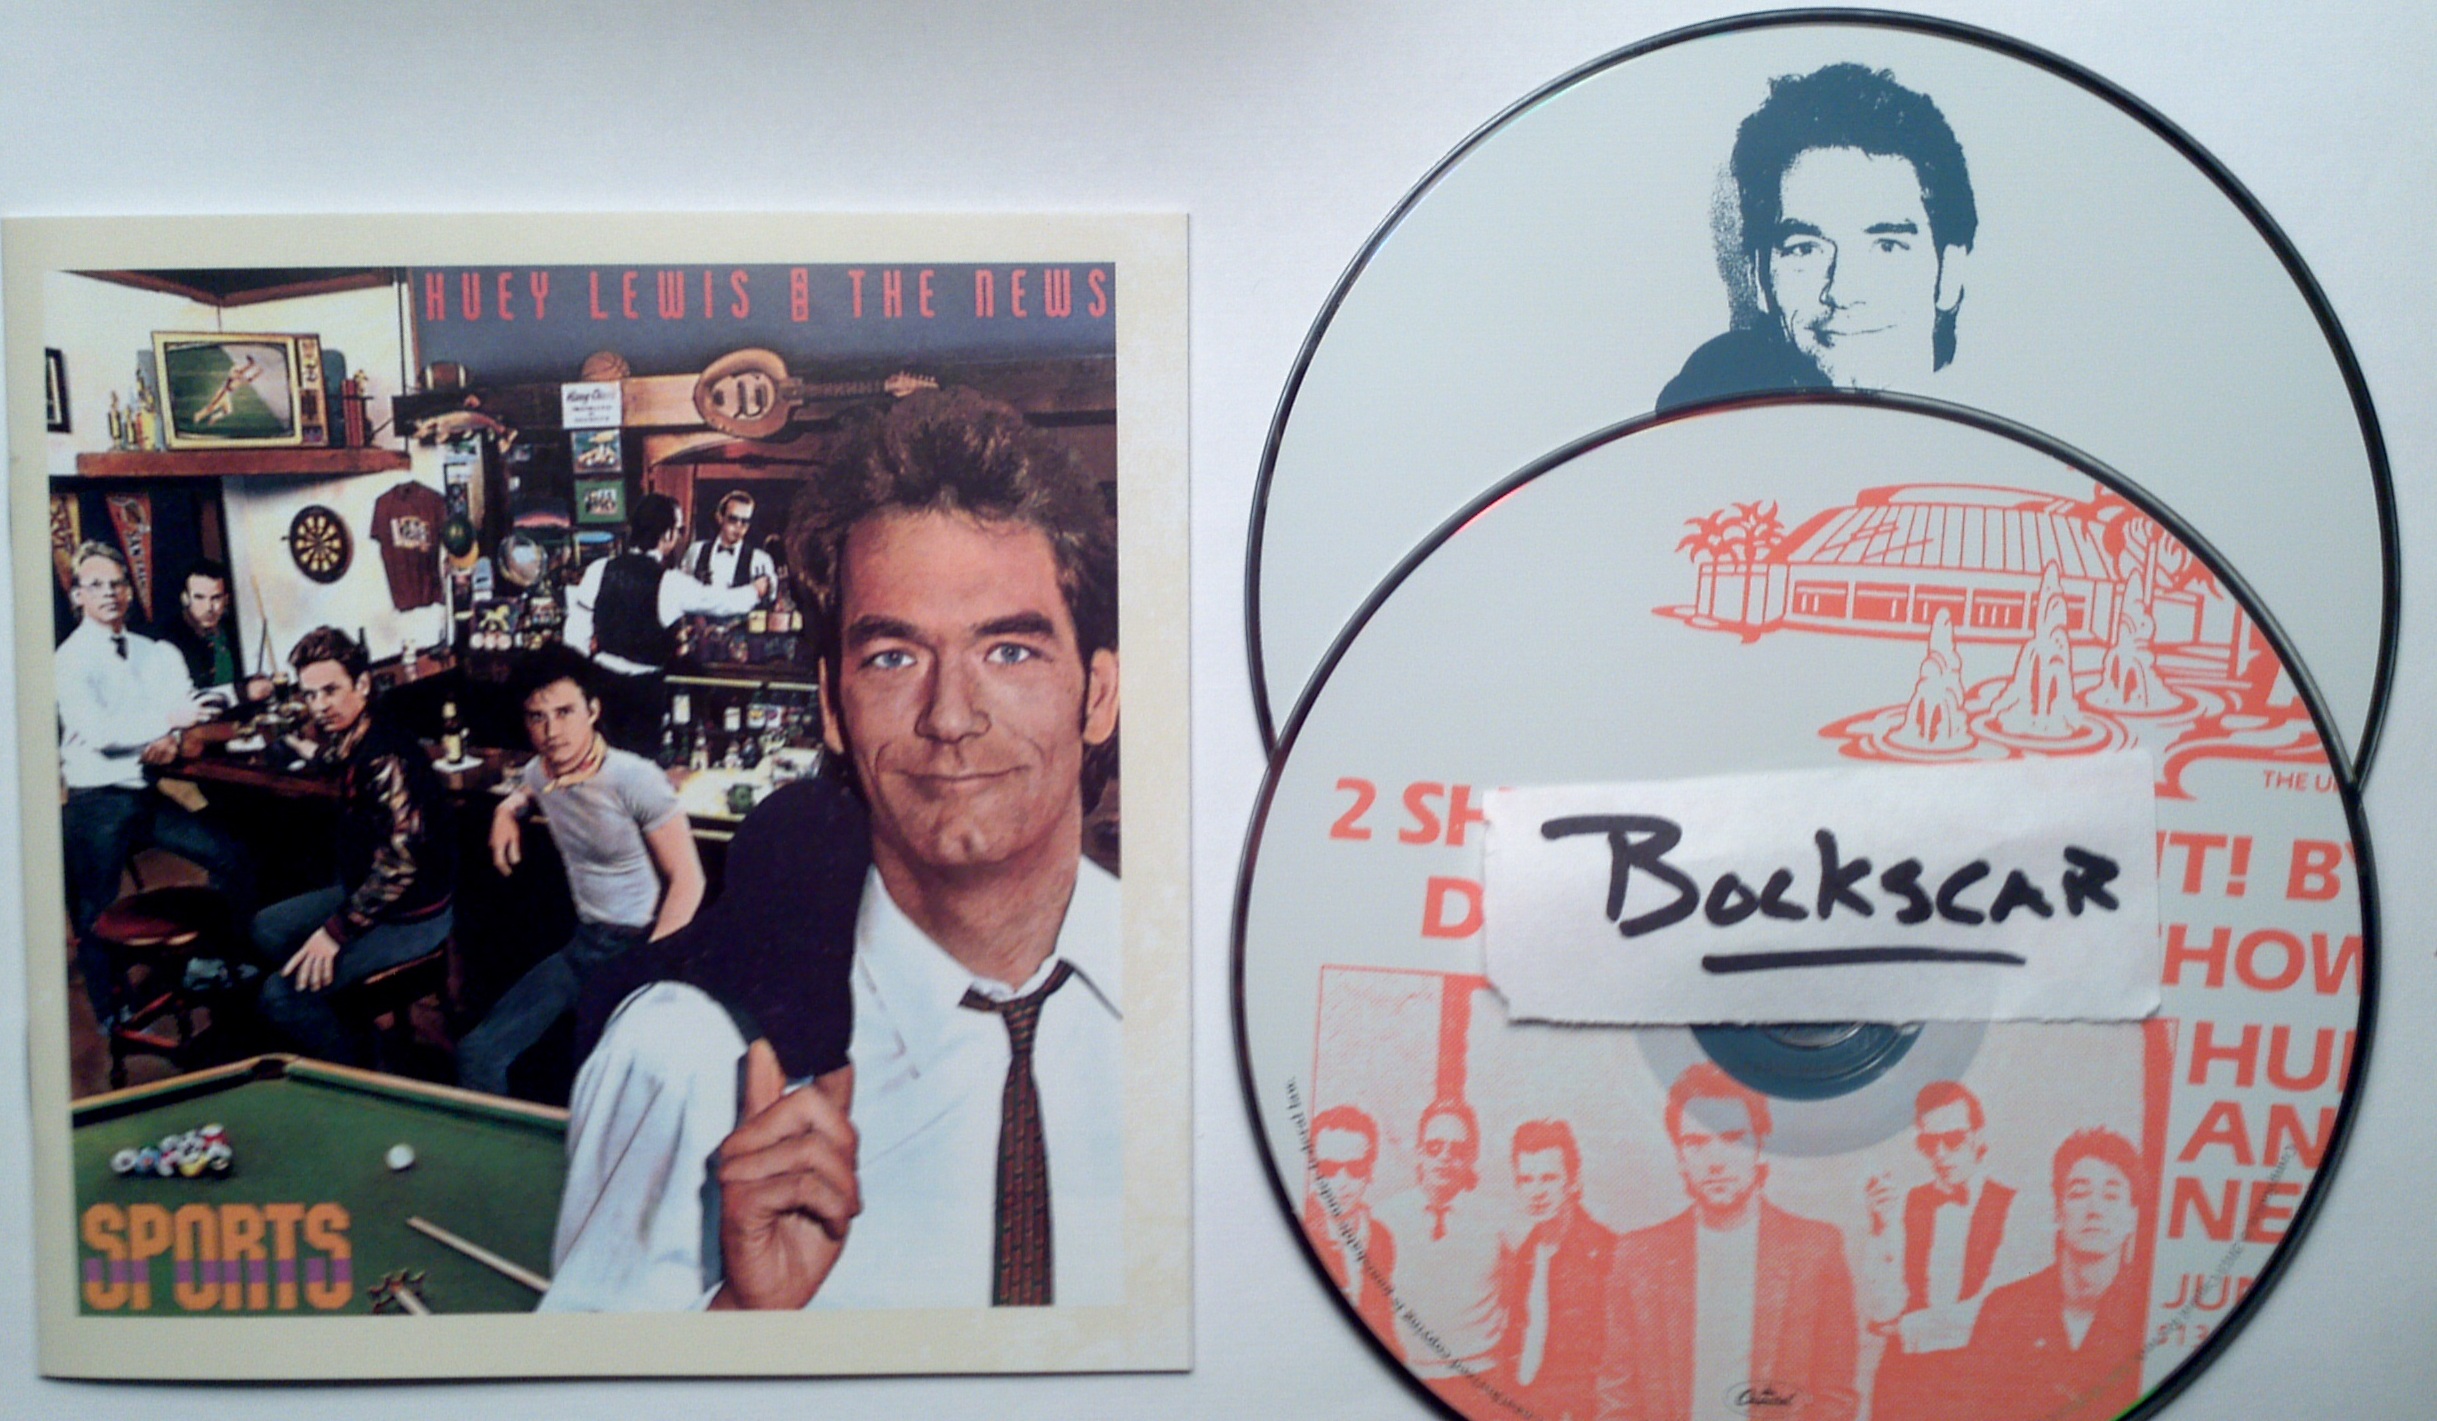 Huey Lewis And The News-Sports 30th Anniversary Edition-Remastered-2CD-FLAC-2013-BOCKSCAR Download